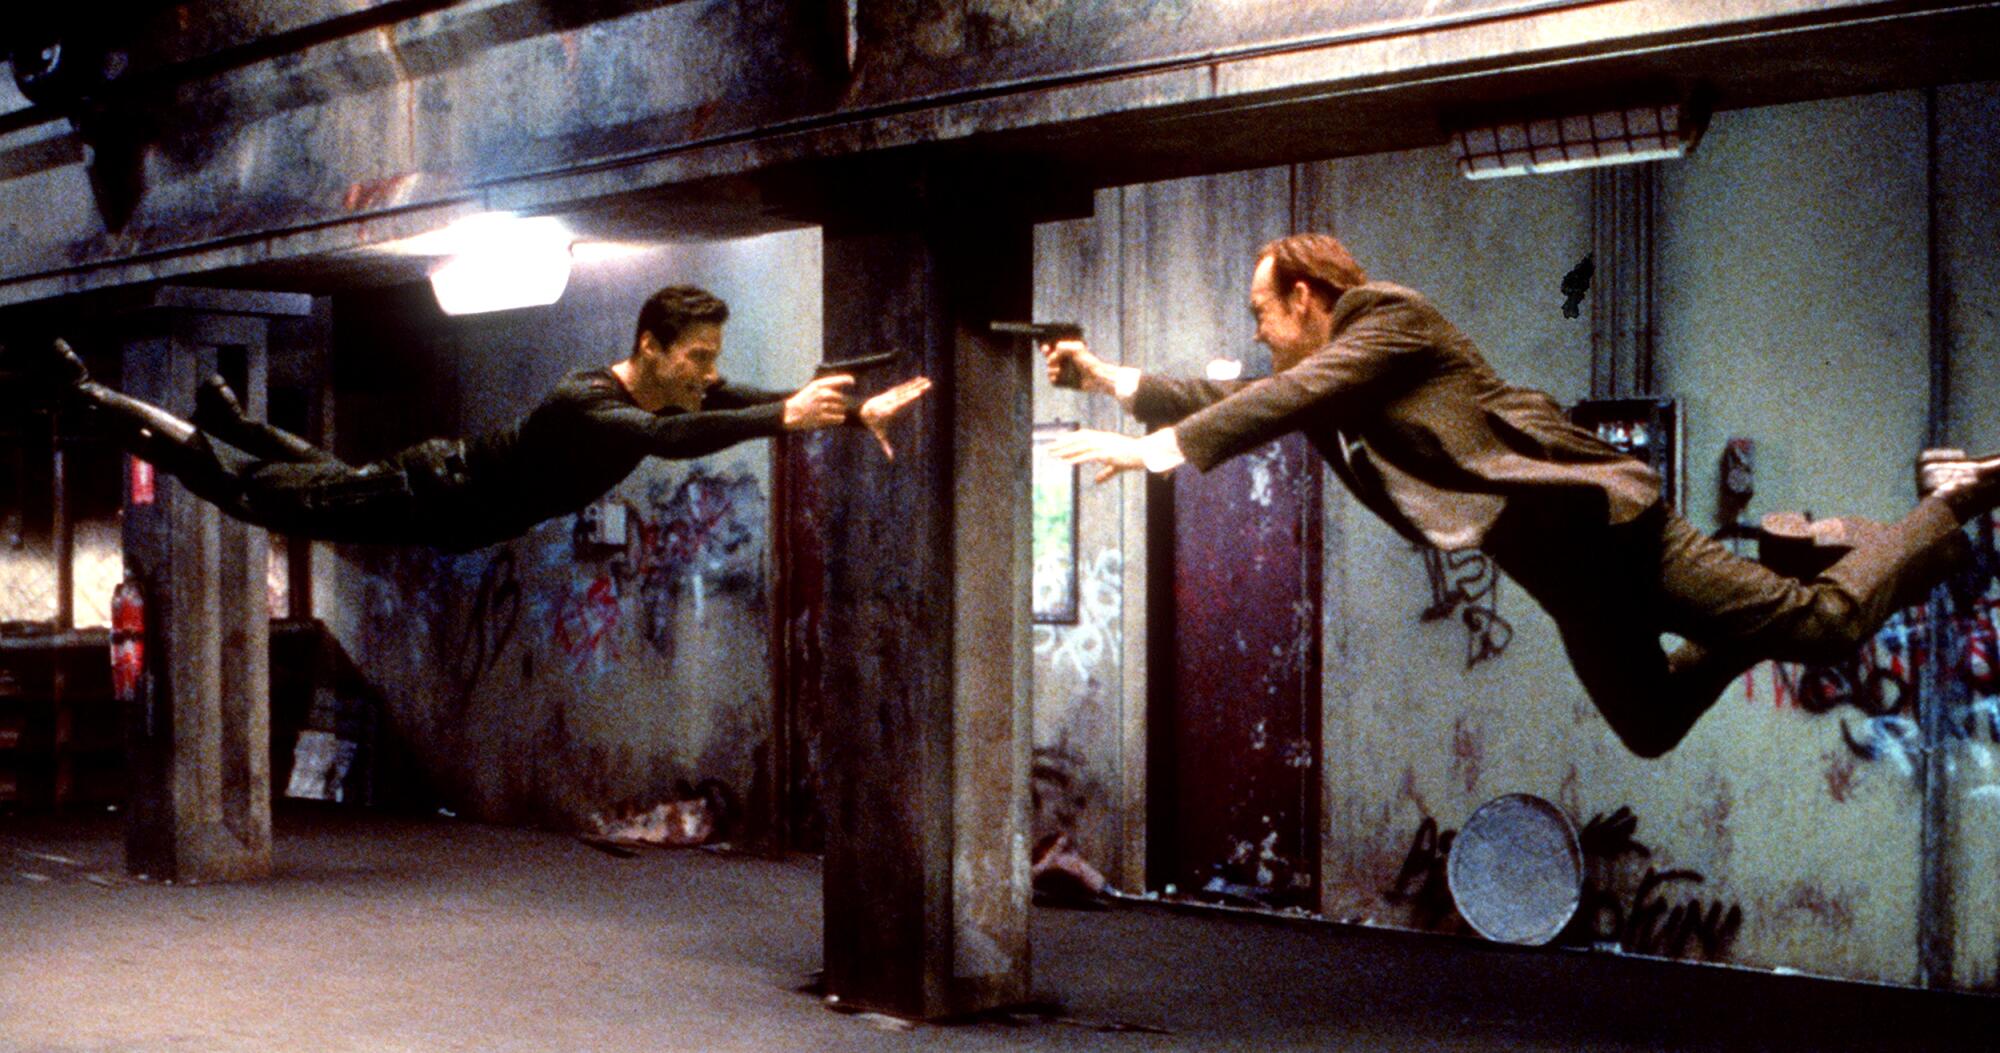 Neo (Keanu Reeves) and agent Smith (Hugo Weaving) face off in a "The Matrix"